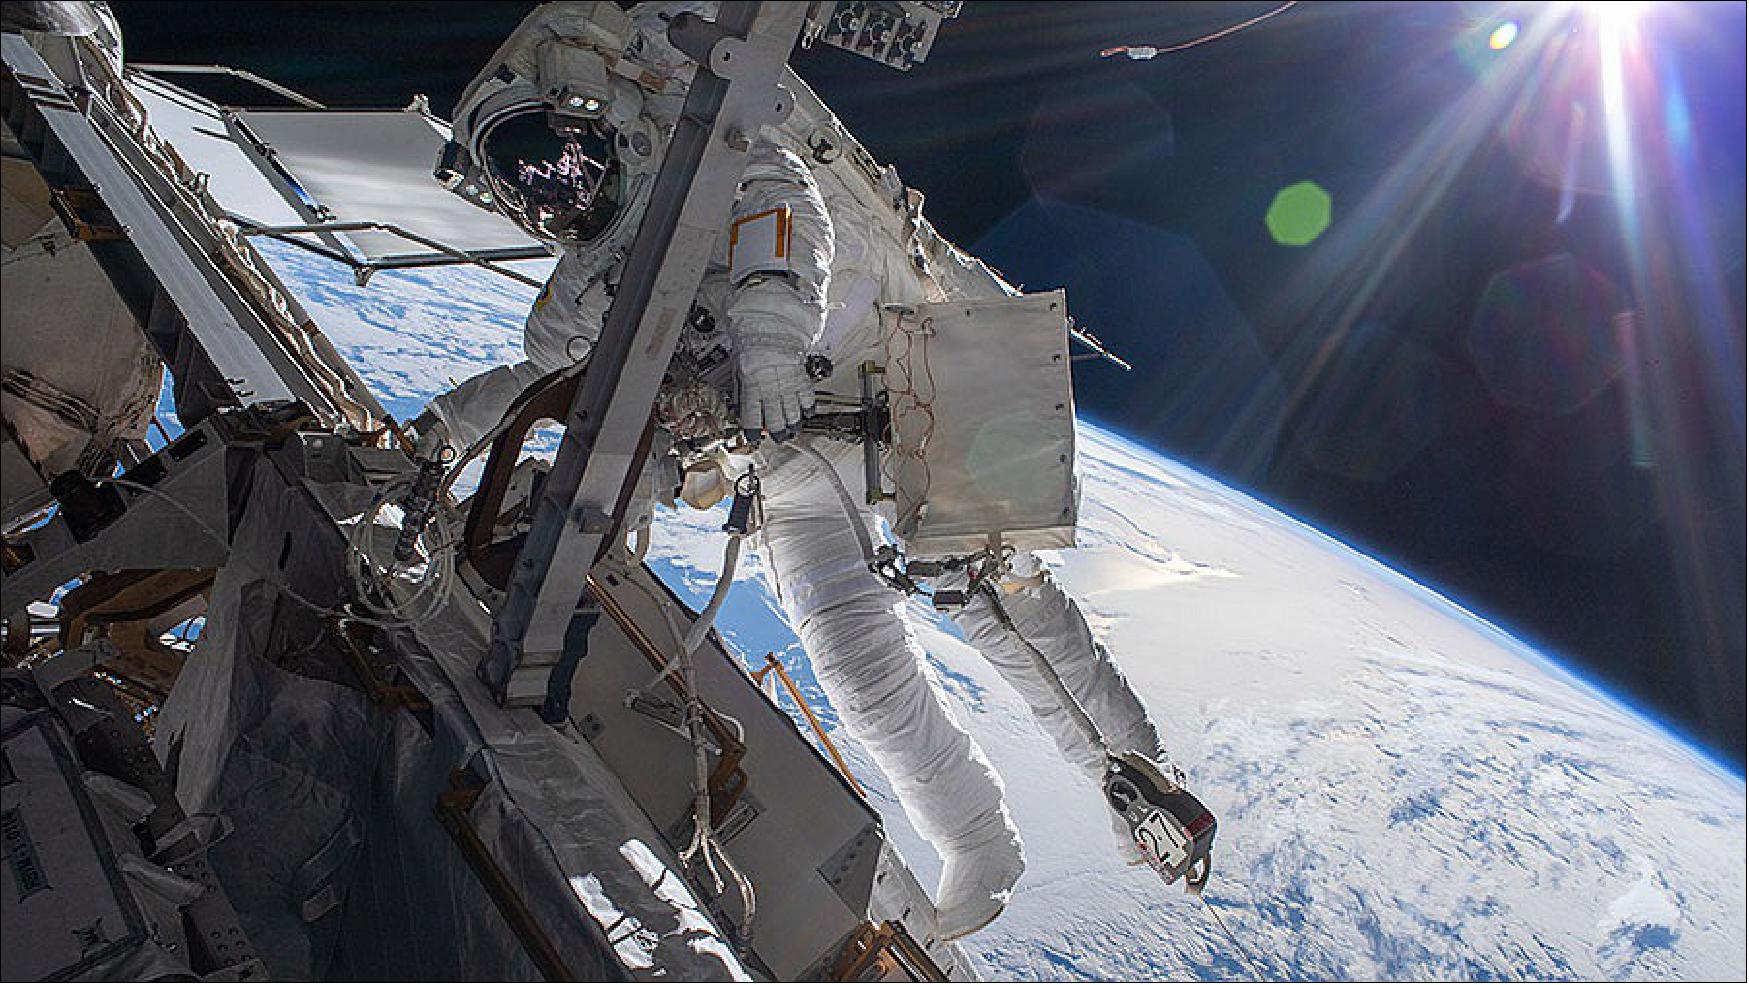 Figure 10: Astronaut Matthias Maurer is pictured during a spacewalk to install thermal gear and electronics components on the space station as it orbited 268 miles above the Pacific Ocean (image credit: NASA TV)